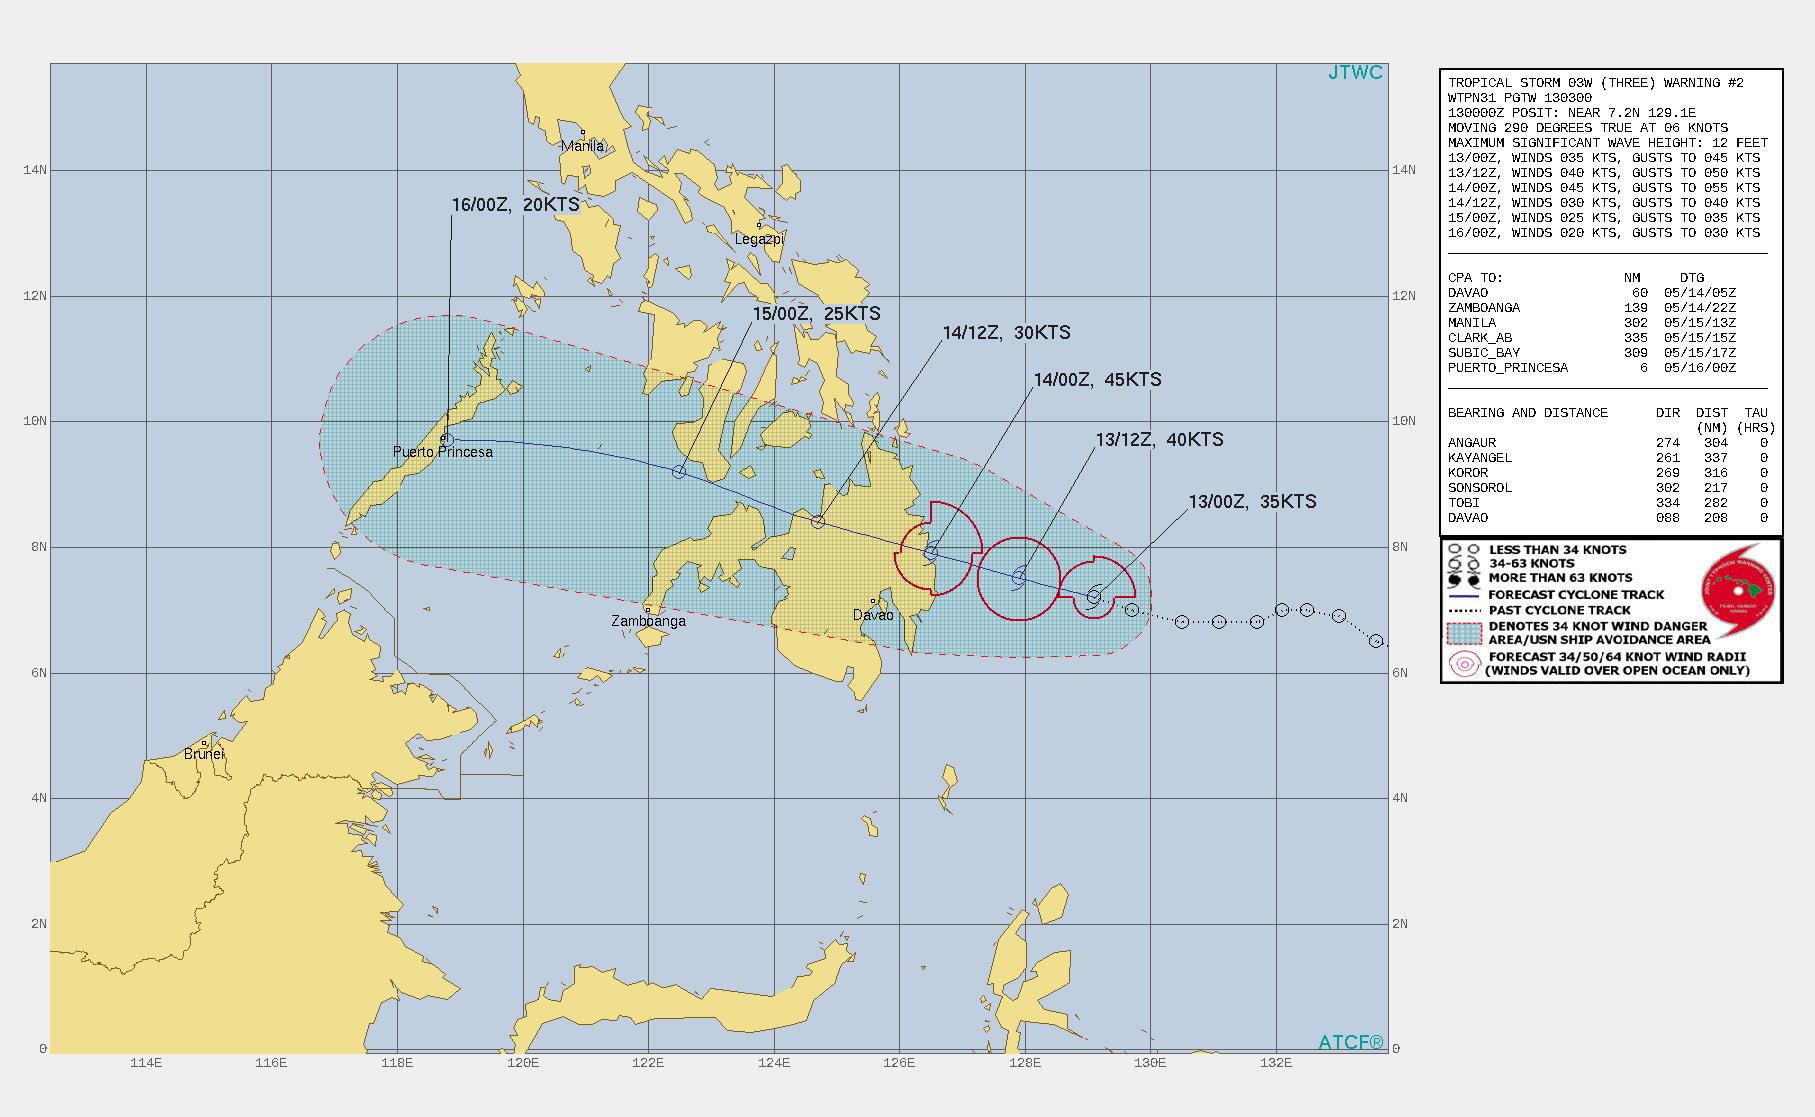 TS 03W. WARNING 2 ISSUED AT 13/03UTC.  TS 03W IS MOVING STEADILY WESTWARD ALONG THE  SOUTHWESTERN PERIPHERY OF THE SUBTROPICAL RIDGE. 700-850MB MEAN  STEERING LAYER WINDS INDICATE A FIRM WESTWARD STEERING FLOW ALL THE  WAY ACROSS MINDANAO. TOTAL PRECIPITABLE WATER LOOPS SHOW PRONOUNCED  DRYING NORTH OF THE 10TH LATITUDE, WHERE VERTICAL WIND SHEAR RISES  SHARPLY. THERE IS GOOD CONVICTION THAT TS 03W WILL CONTINUE TRACKING  WEST-NORTHWESTWARD THROUGH THE NEXT 24 HOURS AND MAKE LANDFALL OVER  THE SURIGAO DEL SUR PROVINCE OF MINDANAO, NEAR THE 8TH LATITUDE. FOR  THE NEXT 24 HOURS THE ENVIRONMENT WILL REMAIN FAVORABLE, WITH LOW  VWS, WARM SSTS AND MARGINAL OUTFLOW ALOFT, WHICH WILL ALLOW FOR THE  SYSTEM TO STEADILY INTENSIFY TO A PEAK OF 45 KNOTS AT LANDFALL.  AS 03W MOVES INTO THE SULU SEA AND RECONSOLIDATES, SUBSIDENCE AND INCREASING  VERTICAL WIND SHEAR FROM AN UPPER-LEVEL TROUGH ENCROACHING FROM THE  NORTHWEST WILL RETARD FURTHER DEVELOPMENT.